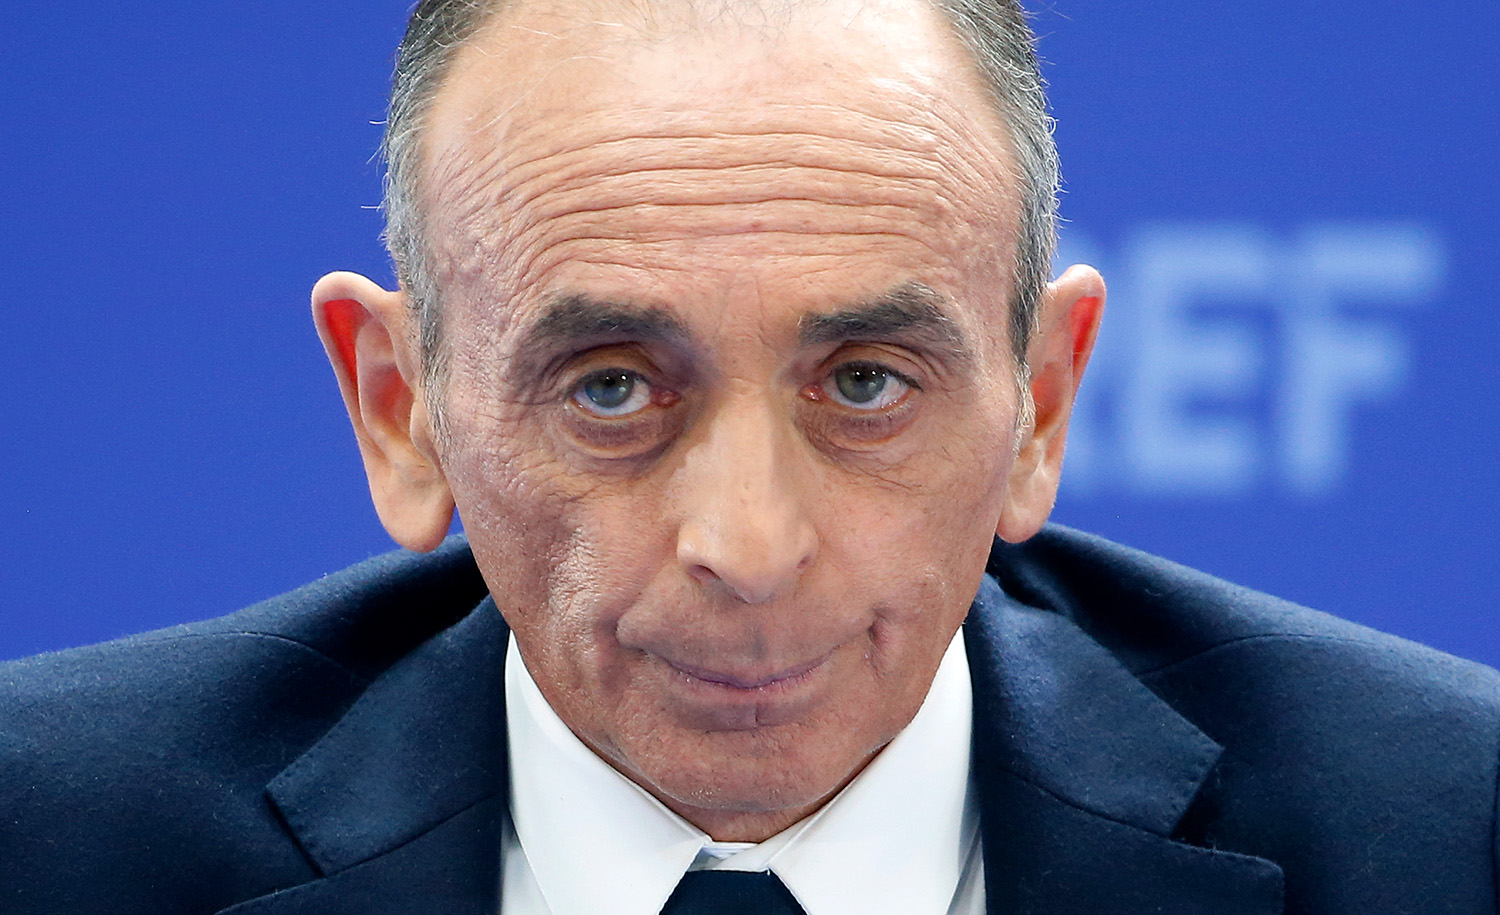 Eric Zemmour Has a Vision for French Jews. Will They Follow It?